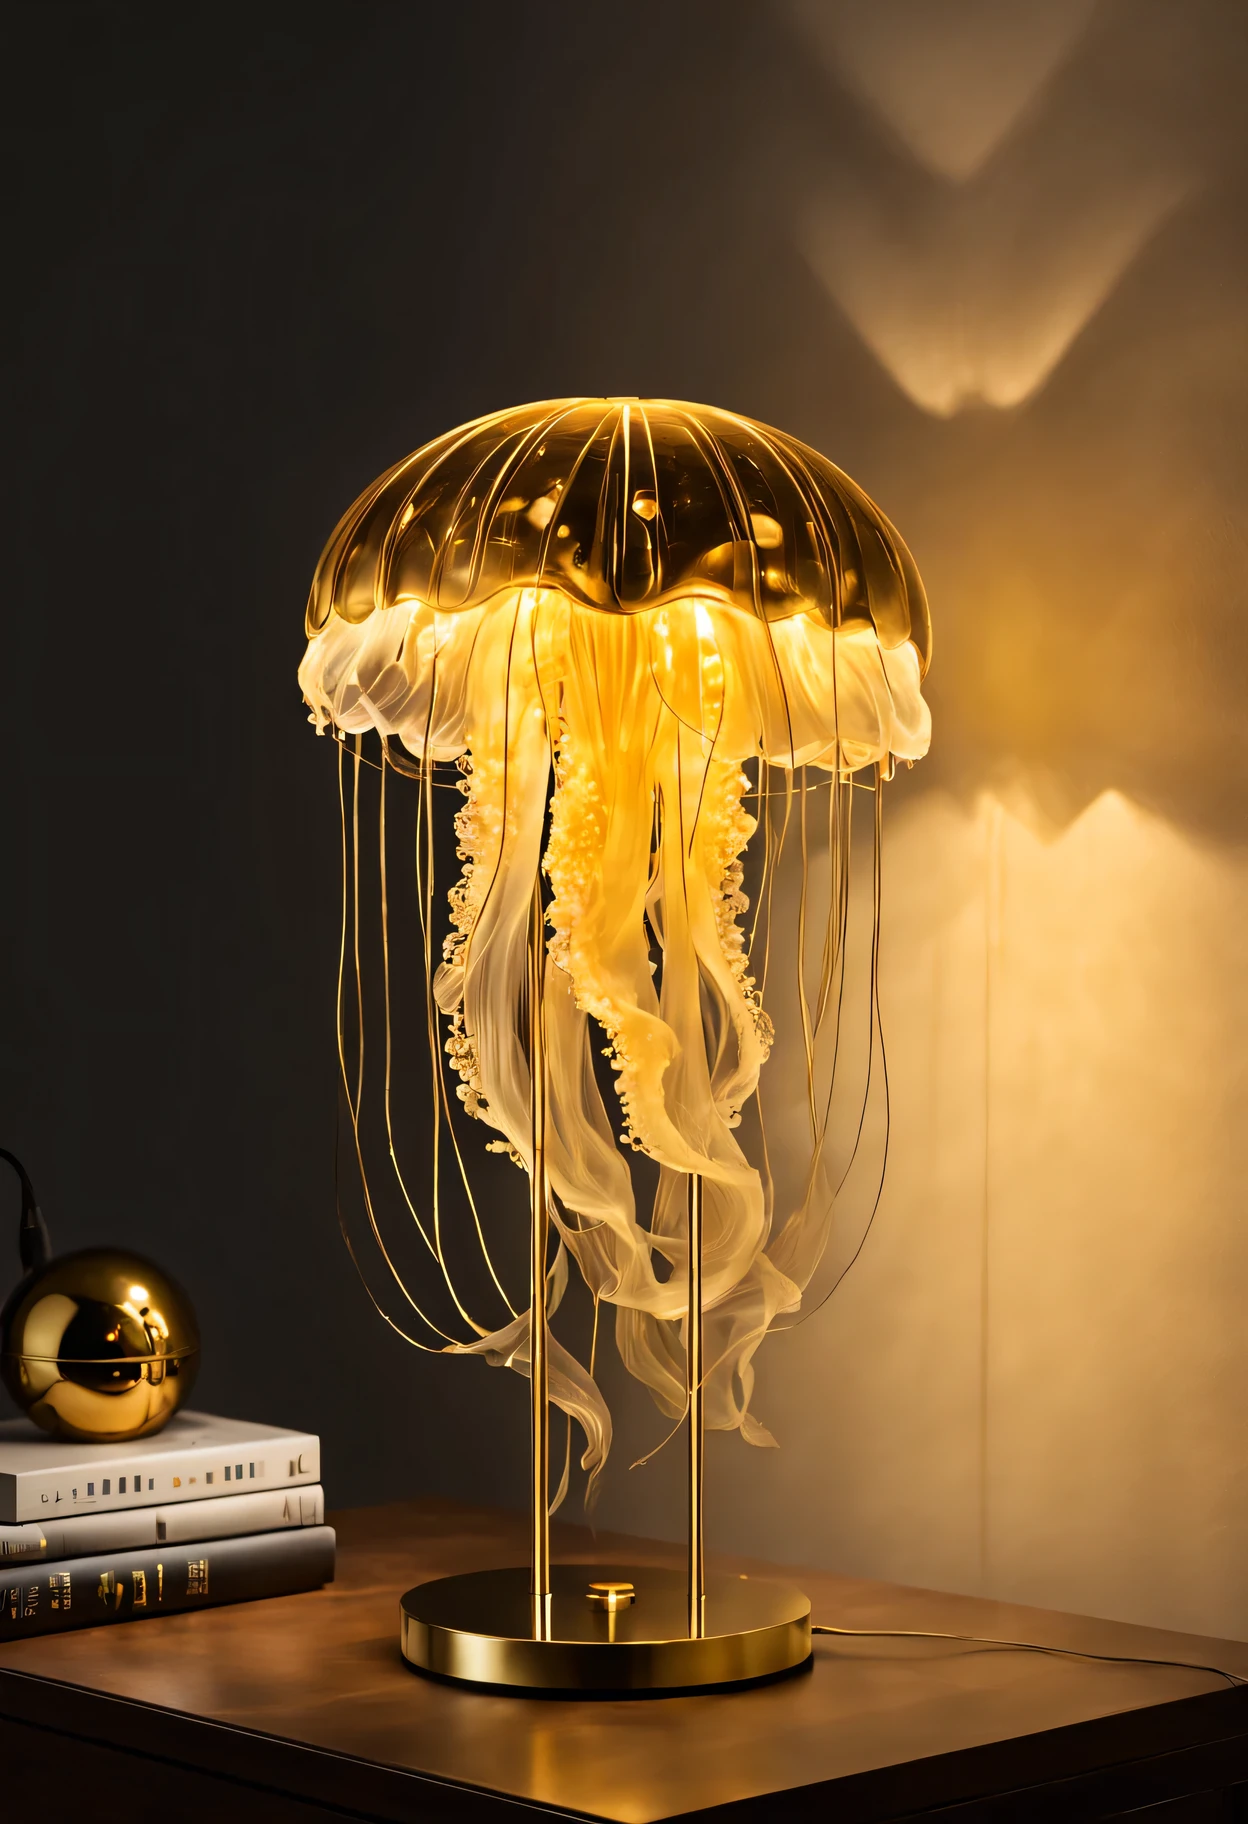 Glowing golden jellyfish table lamp in dark room,Sparkling gold sculpture,Meticulous tentacles,Exquisite body,Dazzling metallic luster,Subtle iridescent glow,Realistic textures and shapes,Exquisite craftsmanship and intricate design,artistic expression of graceful movements,awesome existence,Elegantly suspended in mid-air,Golden tendrils swirl gracefully,bright colors blending seamlessly,Impressive size and scale,Create a sense of wonder and tranquility,breathtaking and unique masterpiece,(best quality,4k,8k,high resolution,masterpiece:1.2),Super detailed,(actual,photoactual,photo-actual:1.37),high dynamic range,ultra high definition,studio lighting,Ultra-fine painting,sharp focus,Physically based rendering,professional,bright colors,Bokeh,portrait,art sculpture.